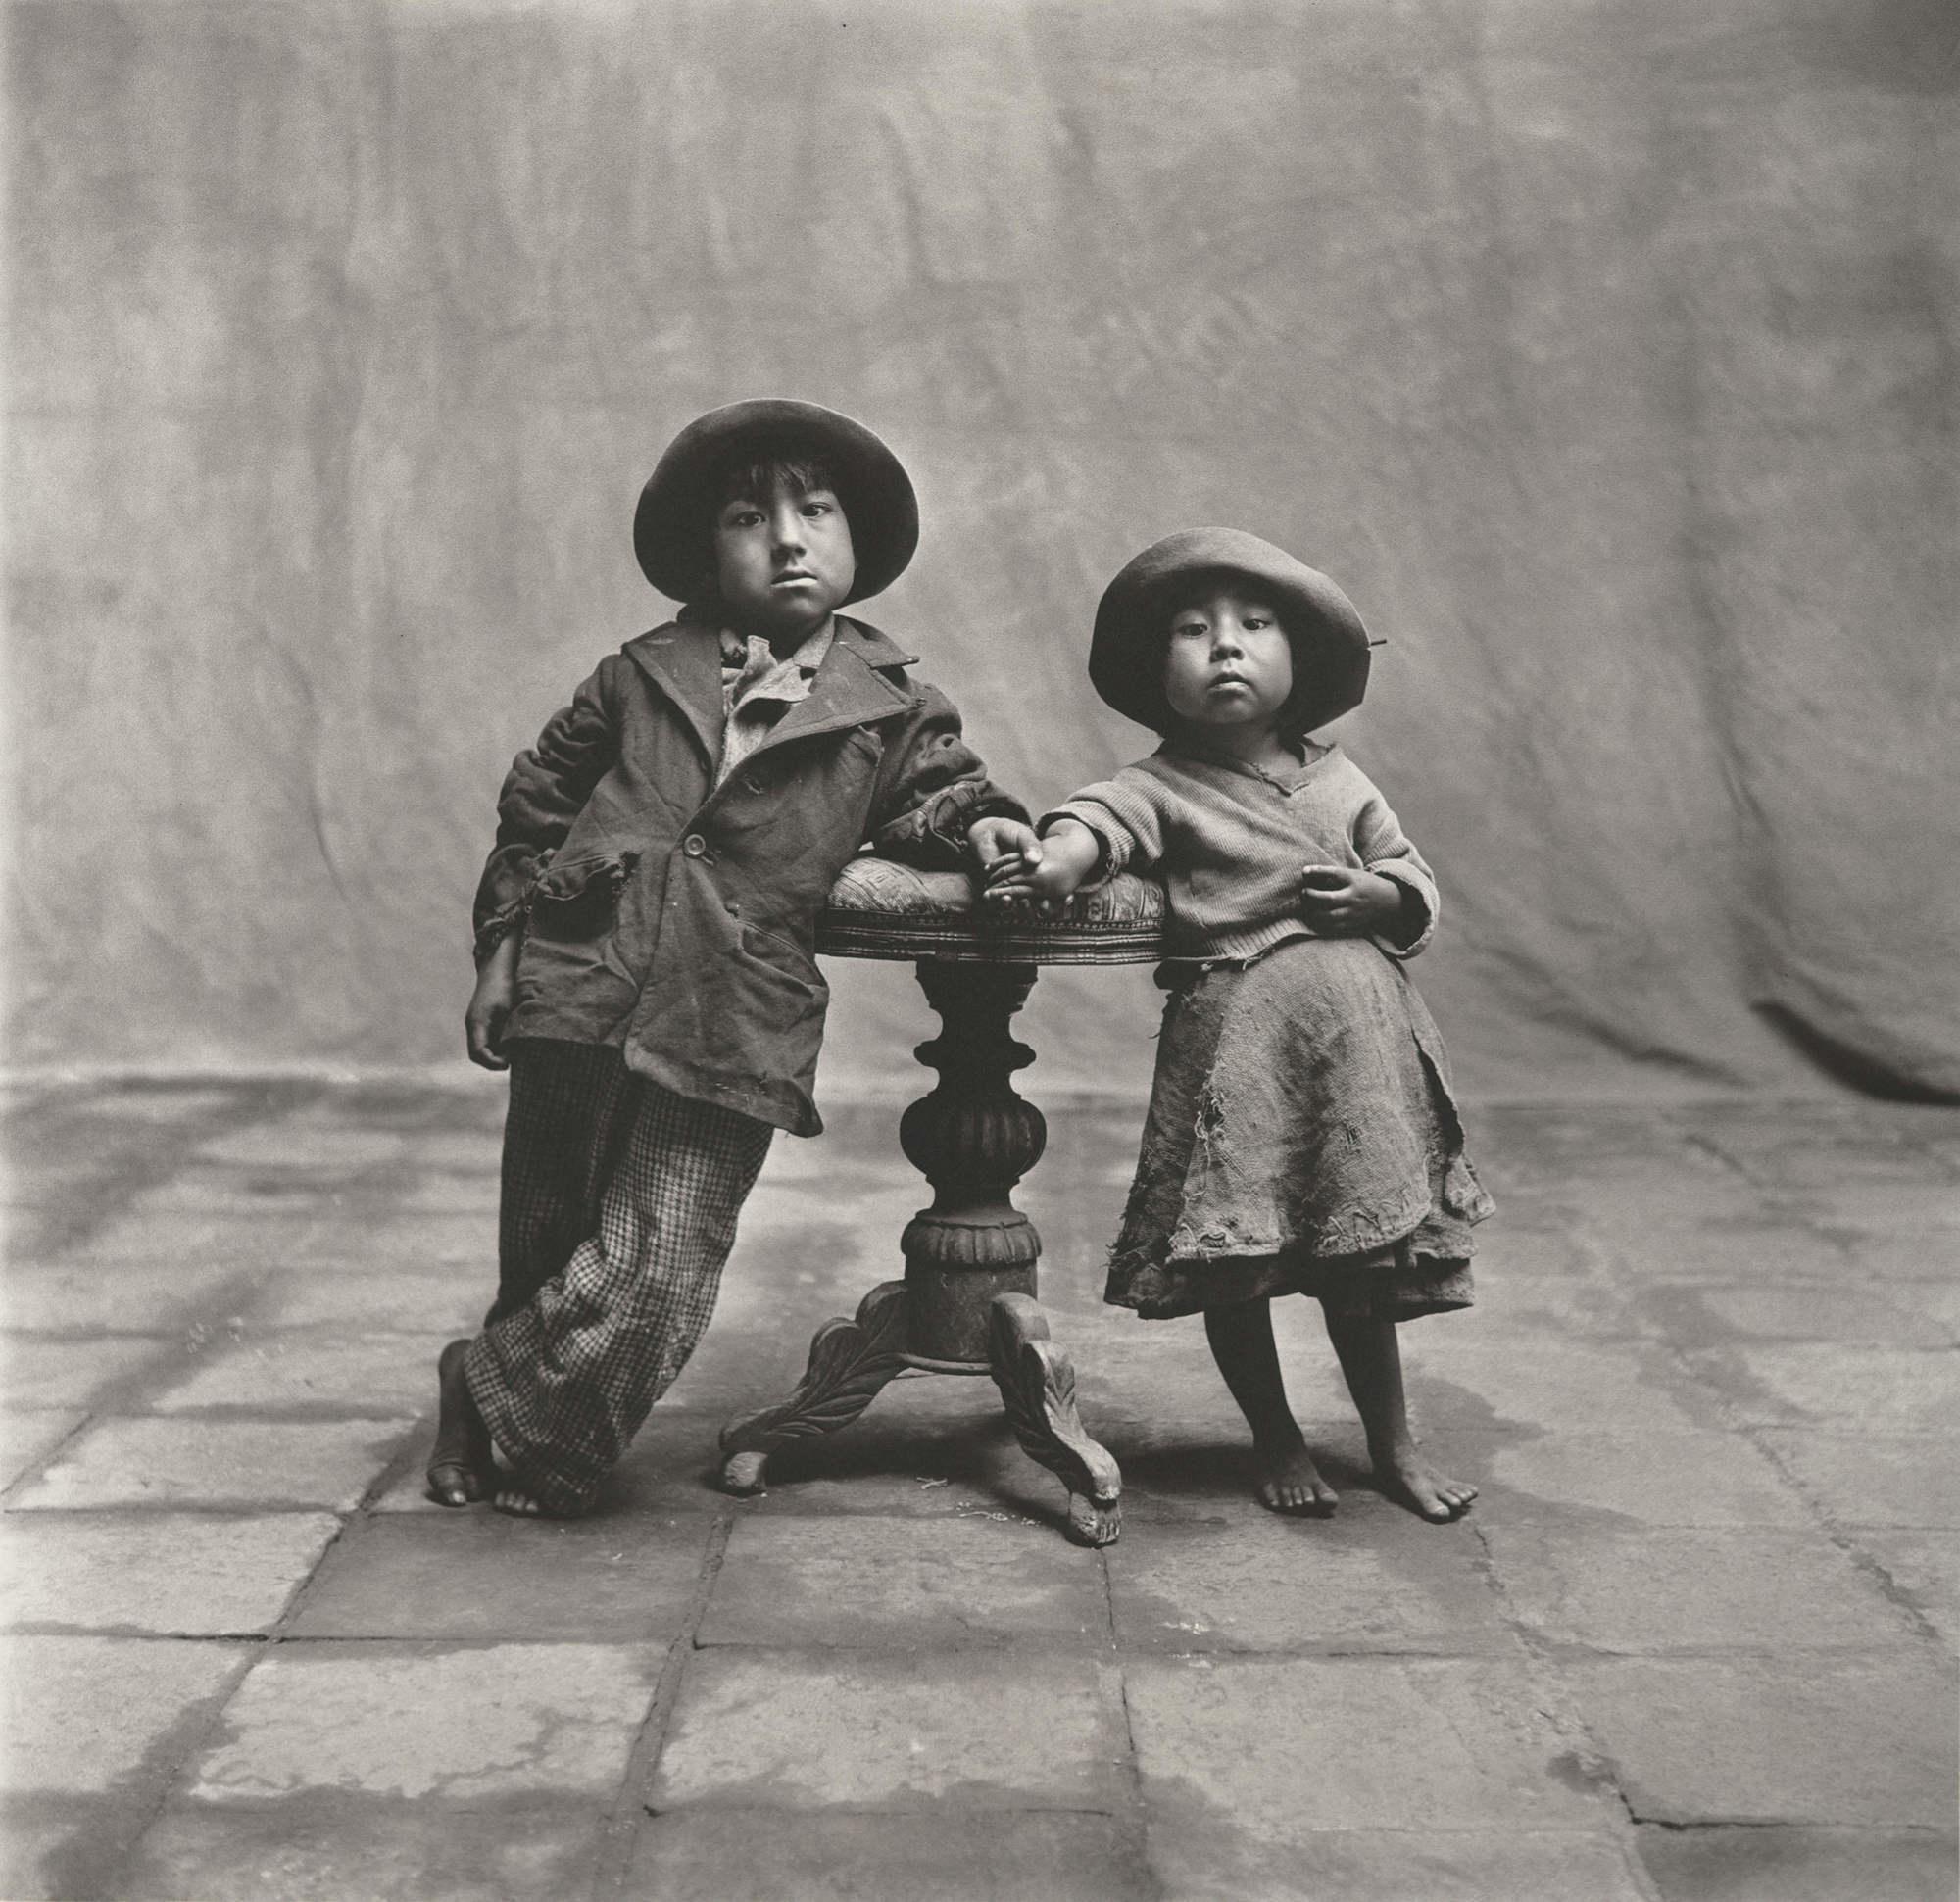 Two children from Cuzco, Peru, have their (very dignified and awesome) portrait taken.